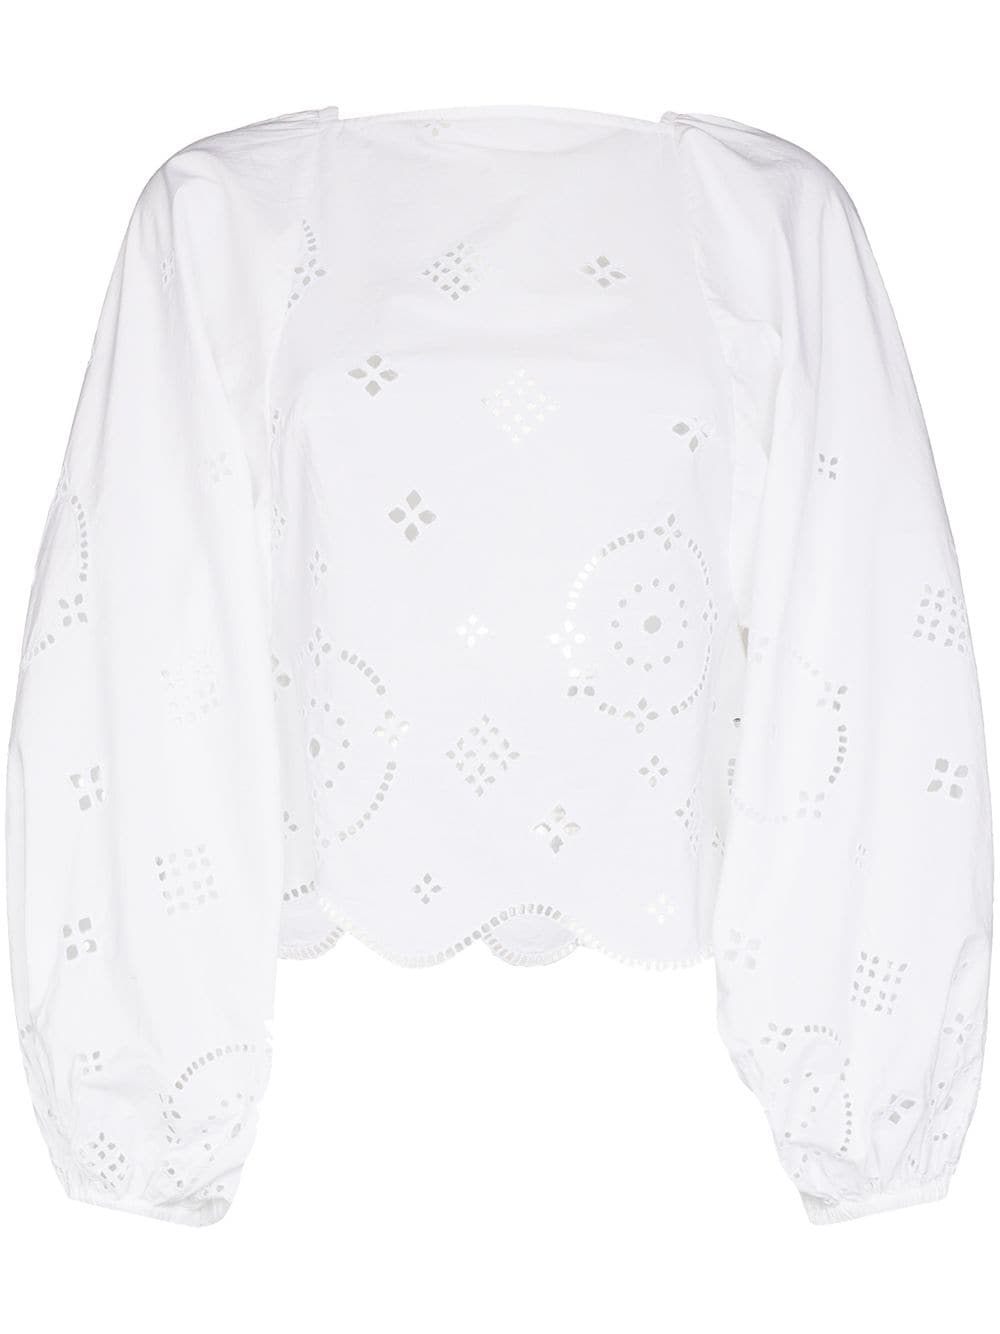 broderie anglaise blouse - 1